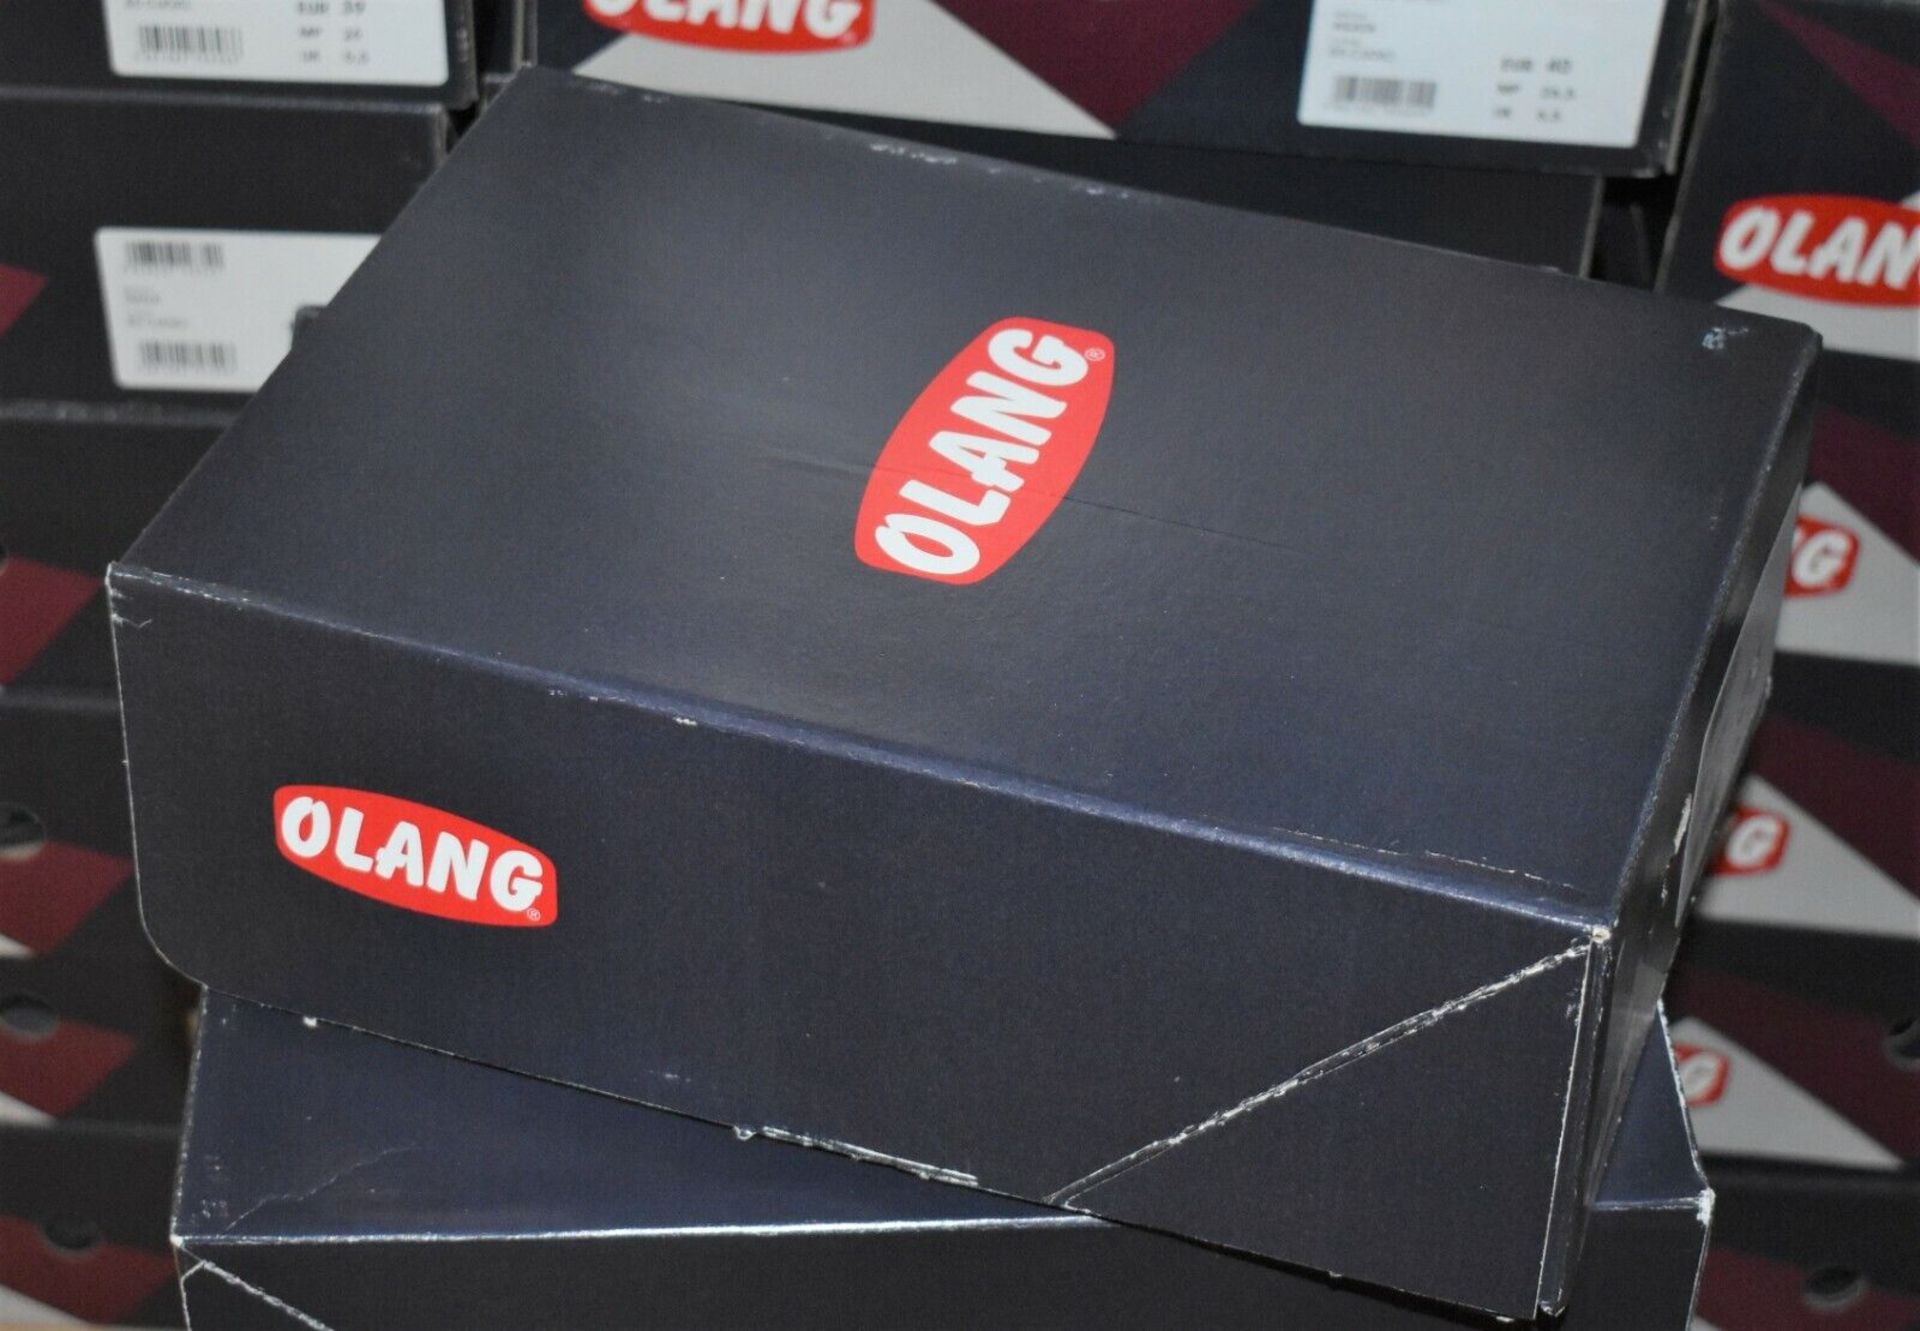 1 x Pair of Designer Olang Women's Winter Boots - Merano.Win.BTX 85 Cuoio - Euro Size 36 - New Boxed - Image 2 of 2